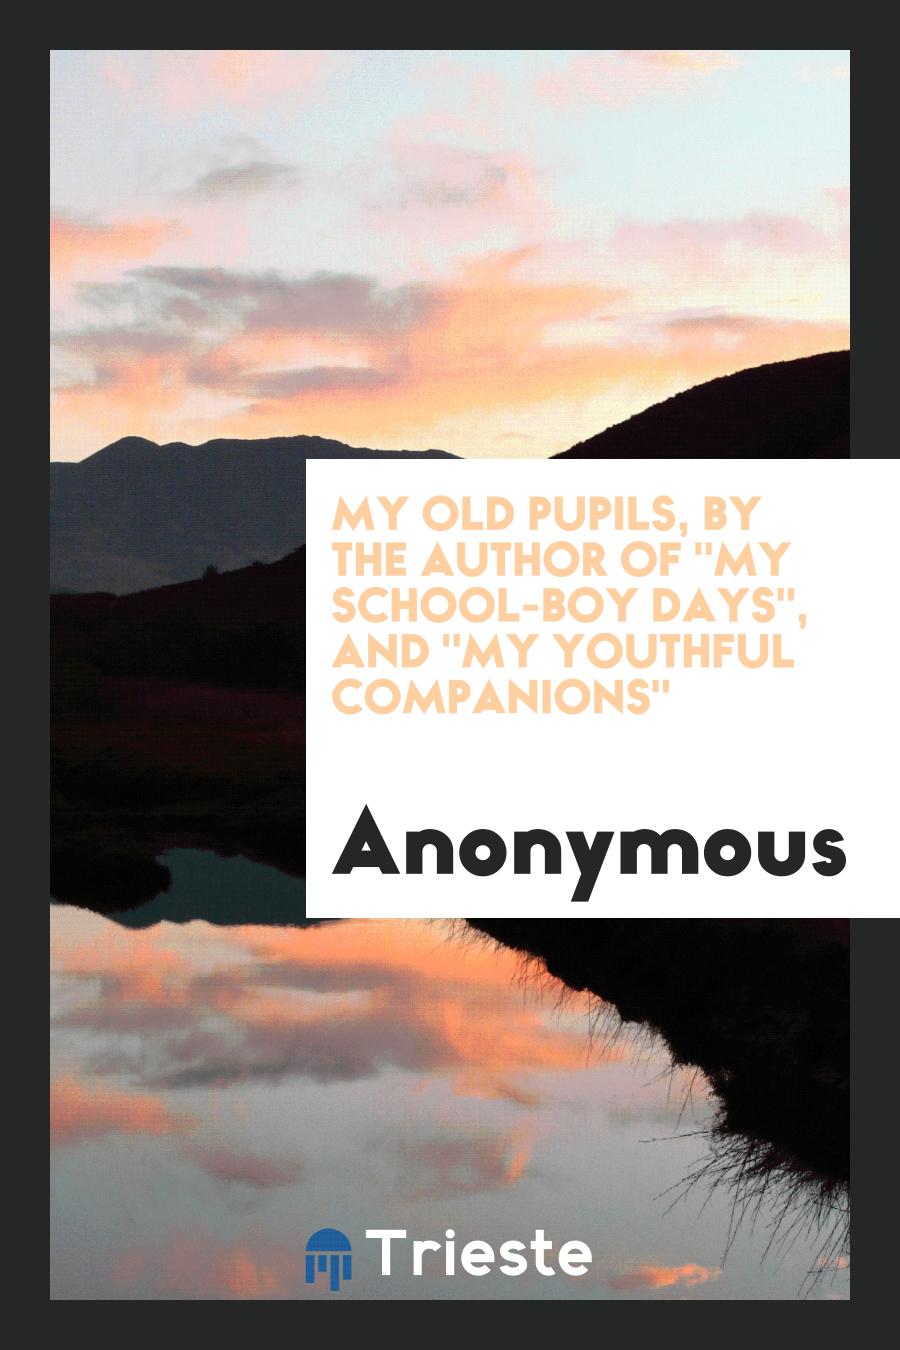 My Old Pupils, by the Author Of "My School-Boy Days", And "My Youthful Companions"